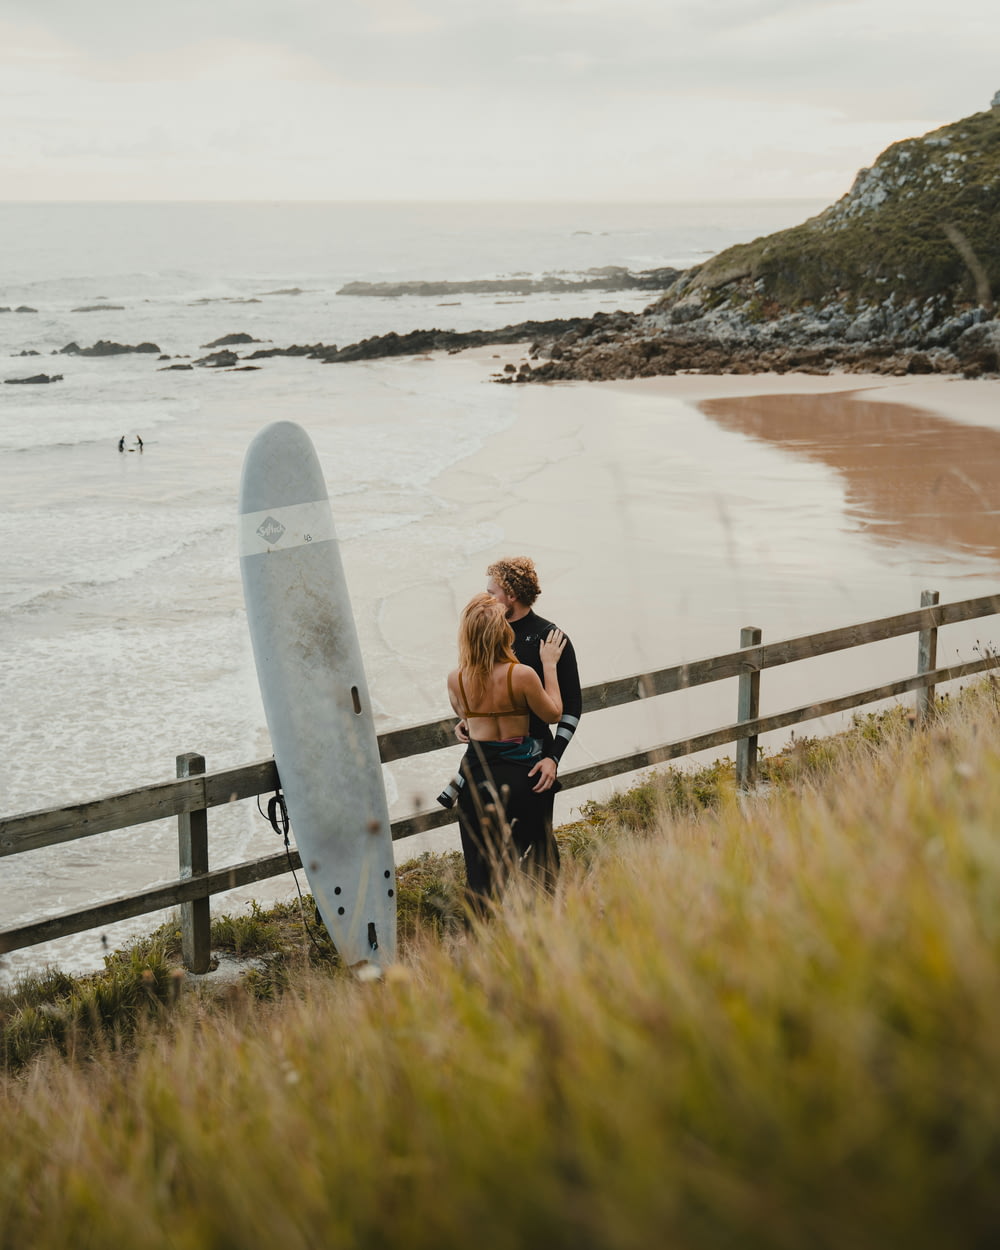 a man and a woman standing next to a surfboard